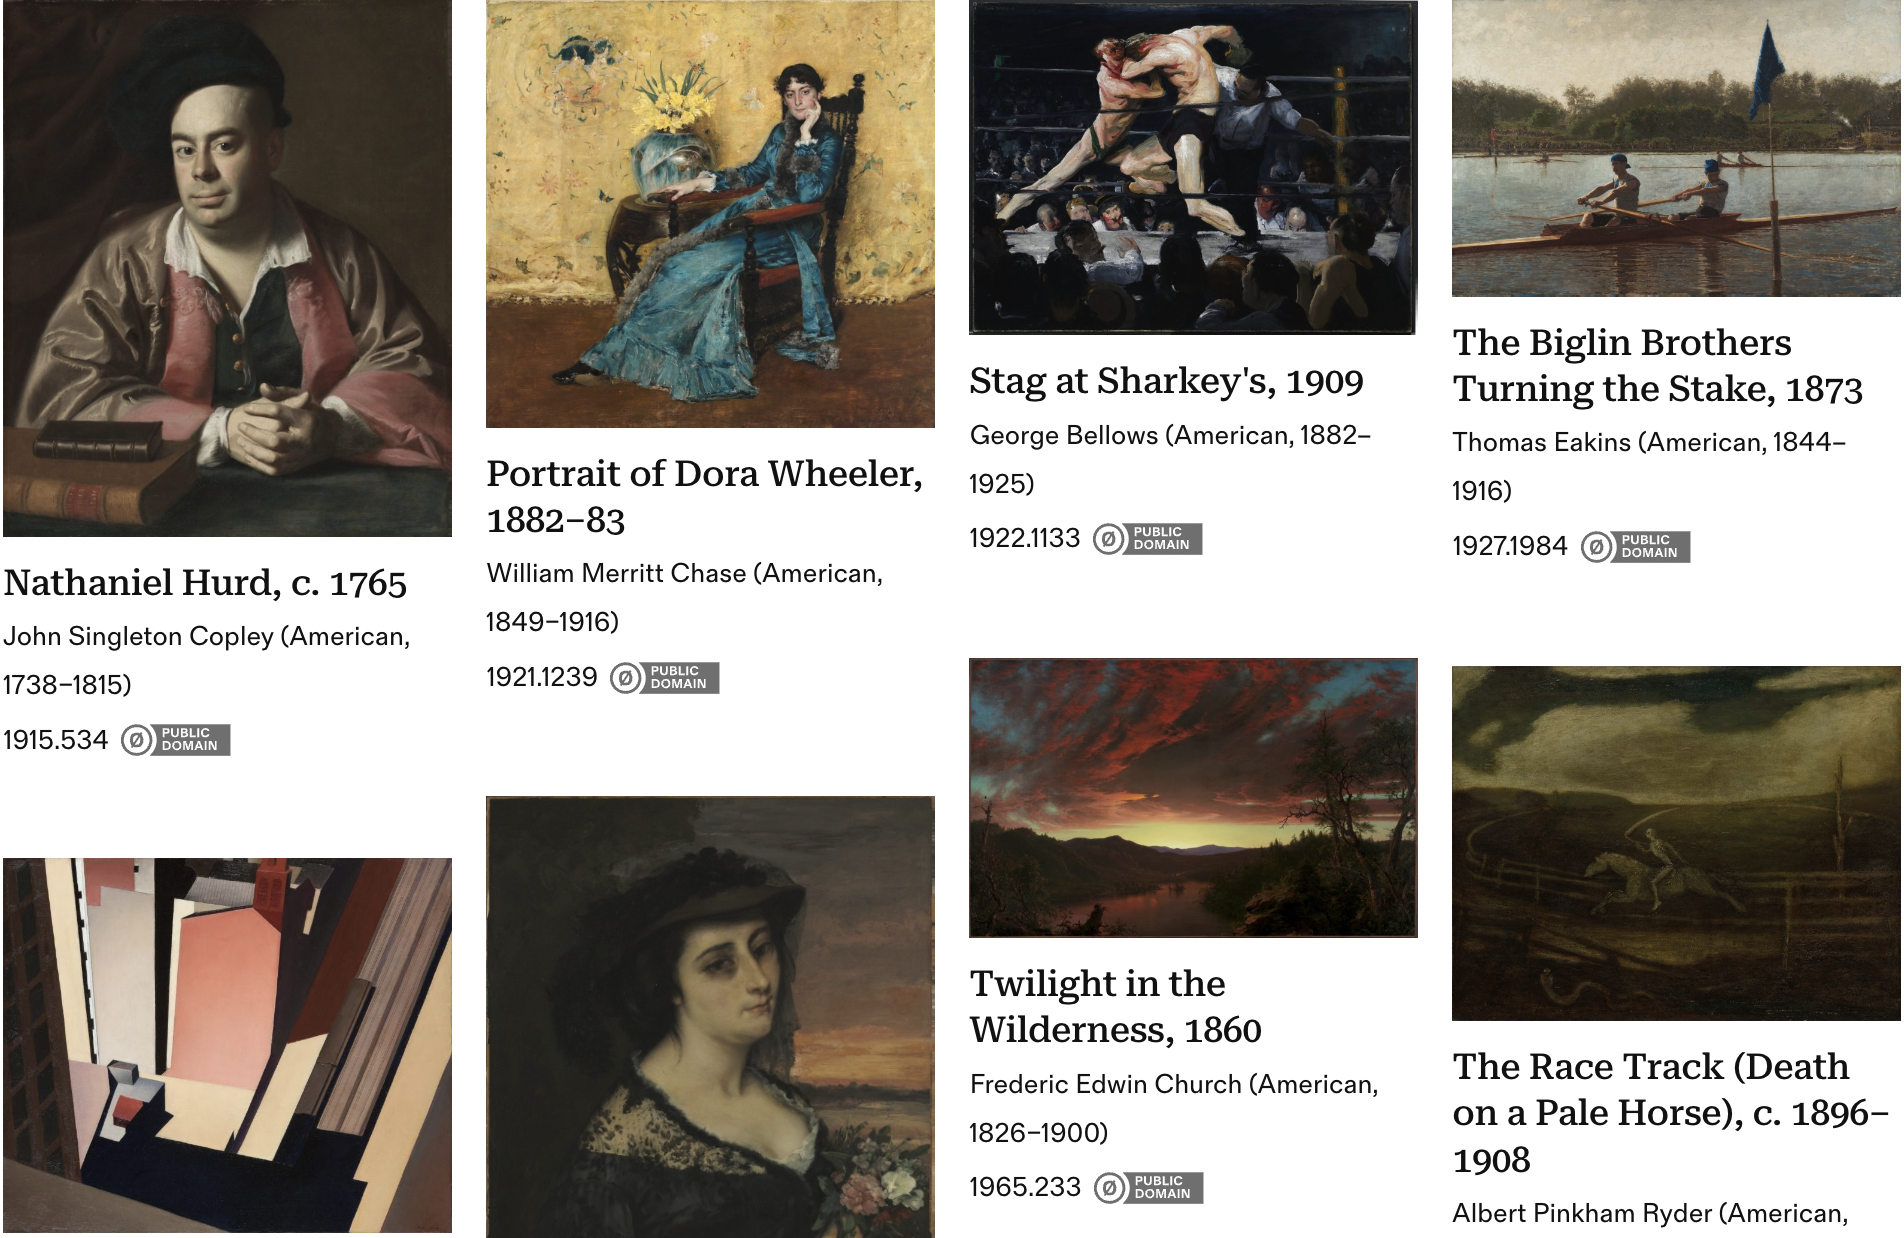 A screenshot of CMA's collection online showing open access images